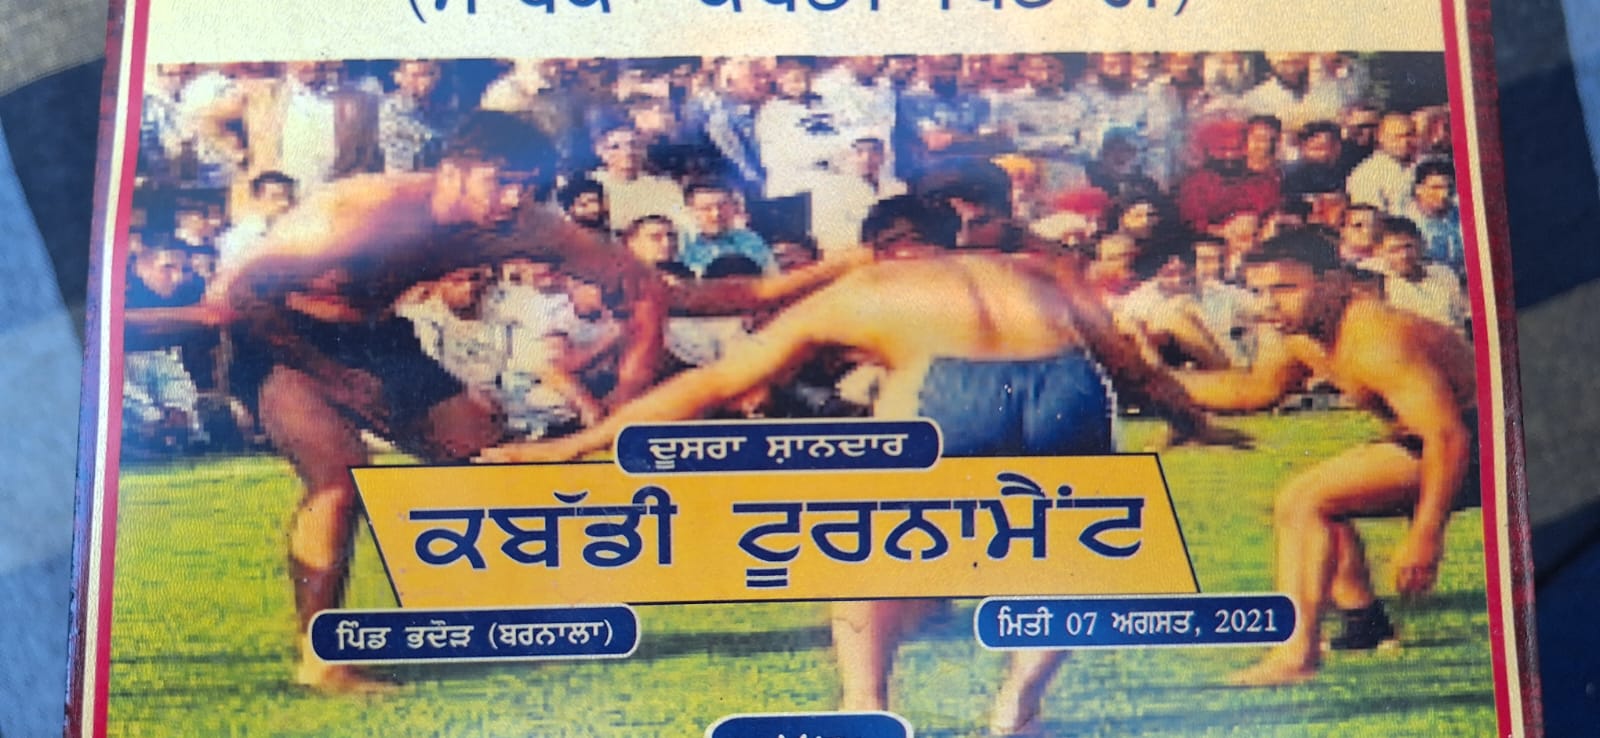 Two people, including a famous kabaddi player, died of white overdose in Bhalur village of Moga